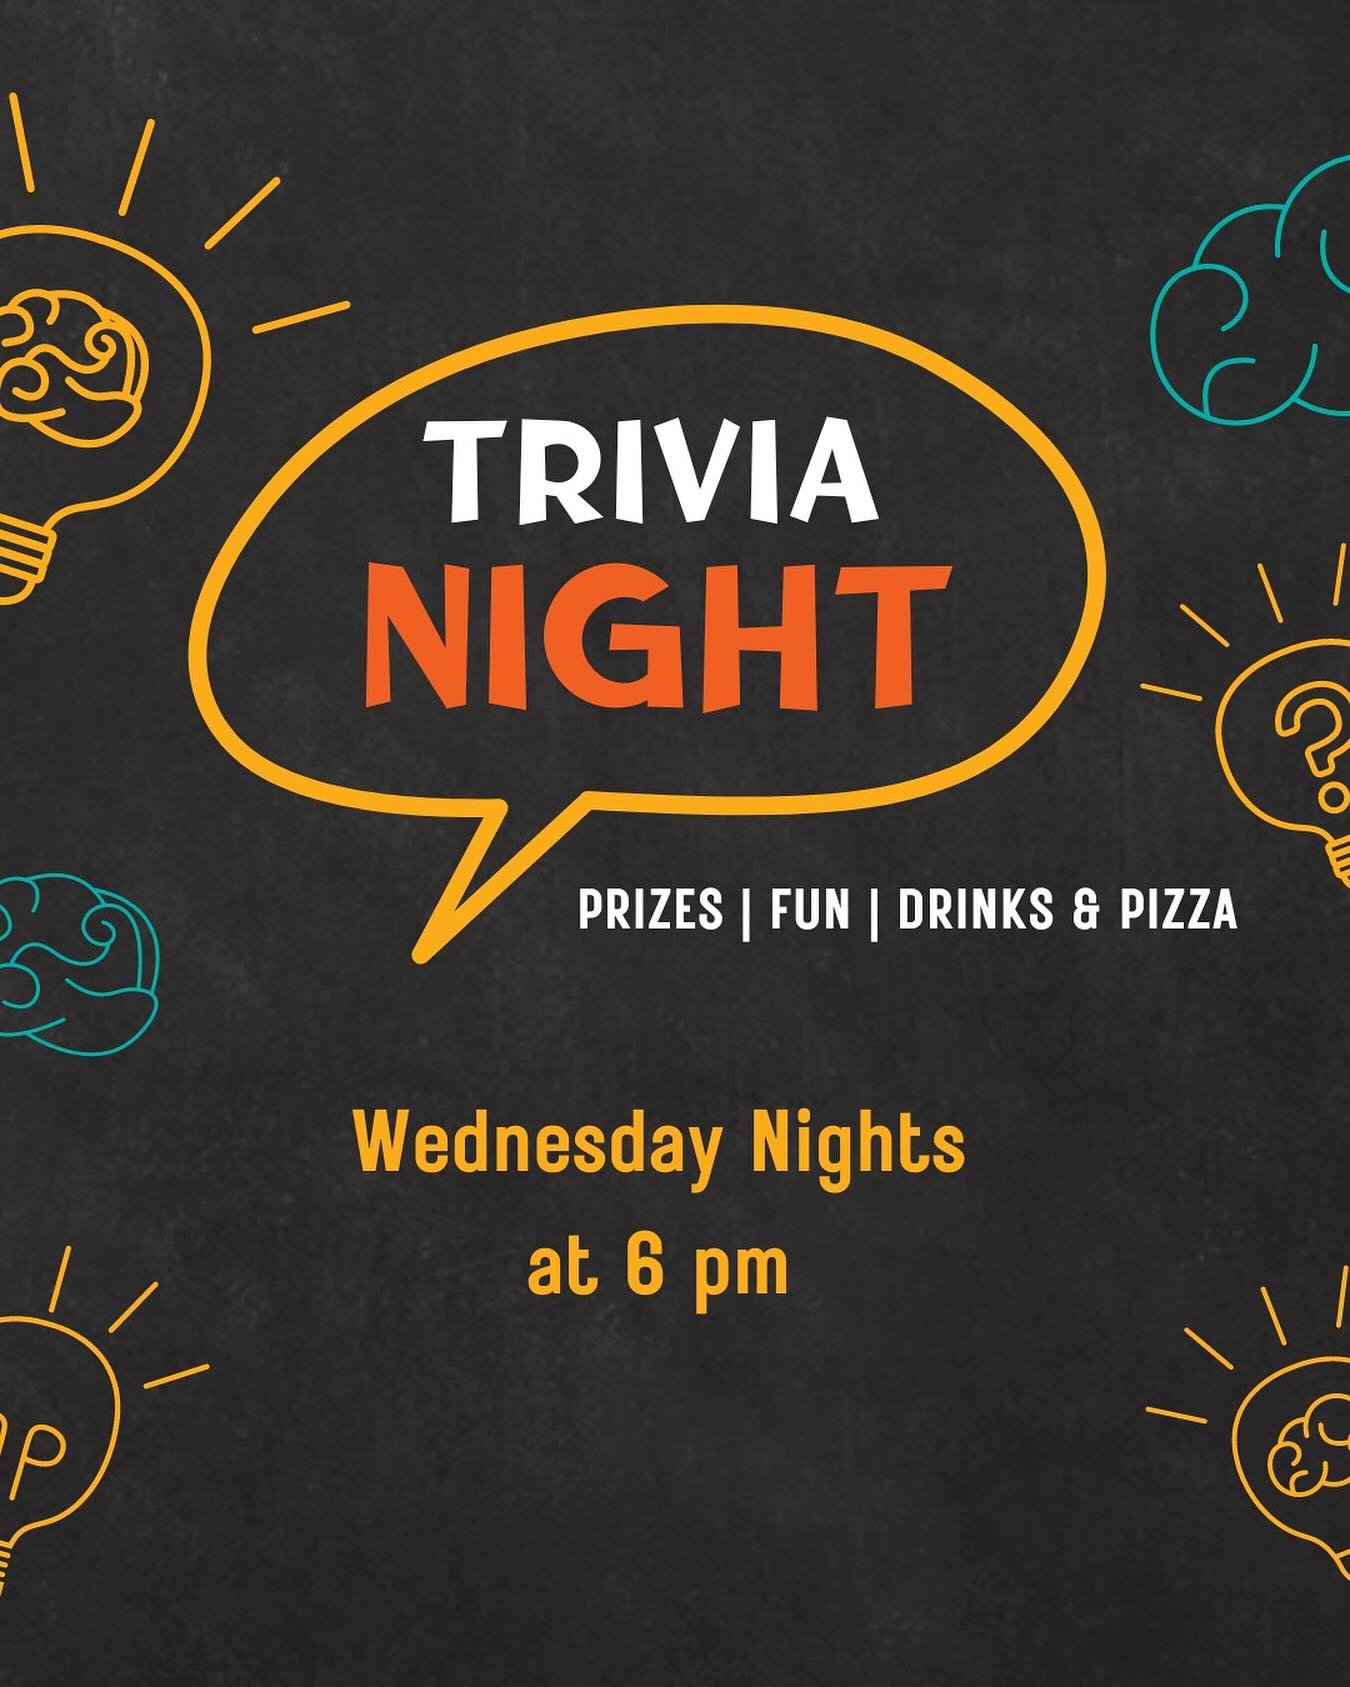 It's time for Wednesday Night Trivia!  Join us at 6 pm with your team of up to 6 to compete for prizes.  Solve the hint below to get a head start at tonight&rsquo;s competition. 

HINT - The answer to the question below, will be an answer to a differ